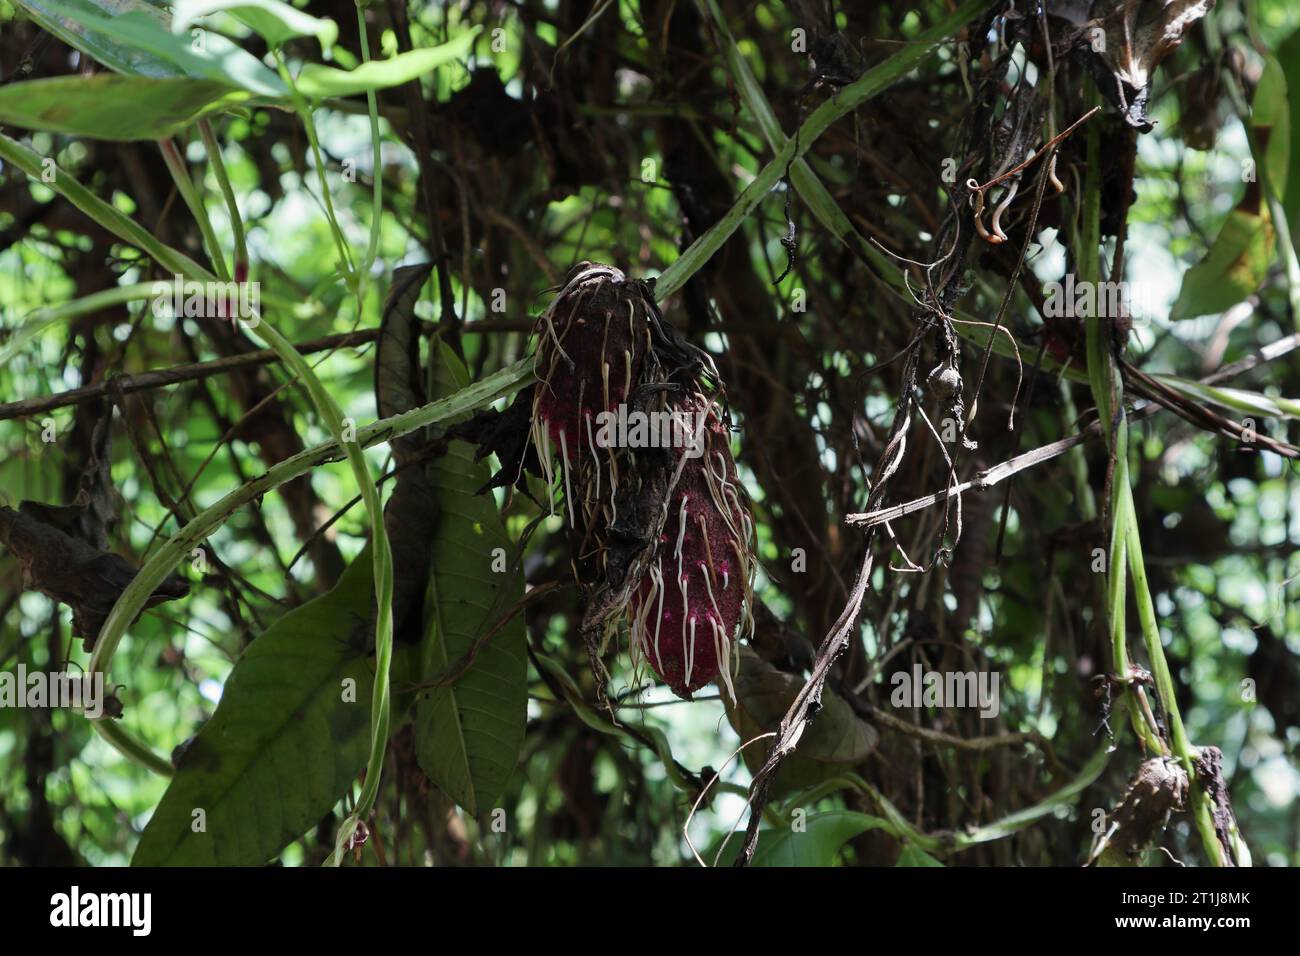 View of the aerial tubers of the purple variety of the Purple Yam (Dioscorea Alata) with the growing new roots hanging on the vine Stock Photo